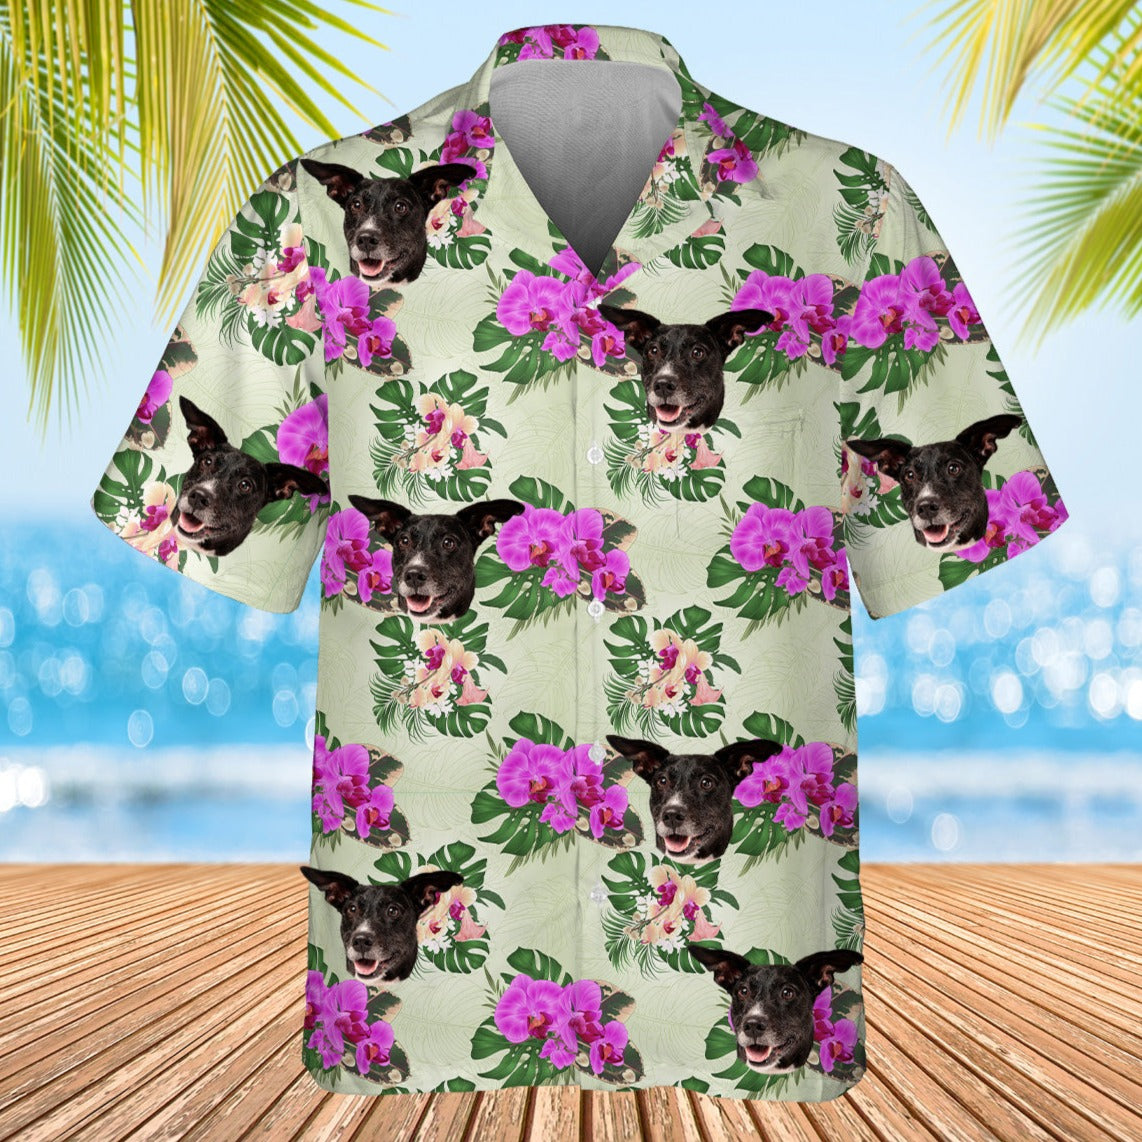 light green leaf and flower themed shirt with dogs